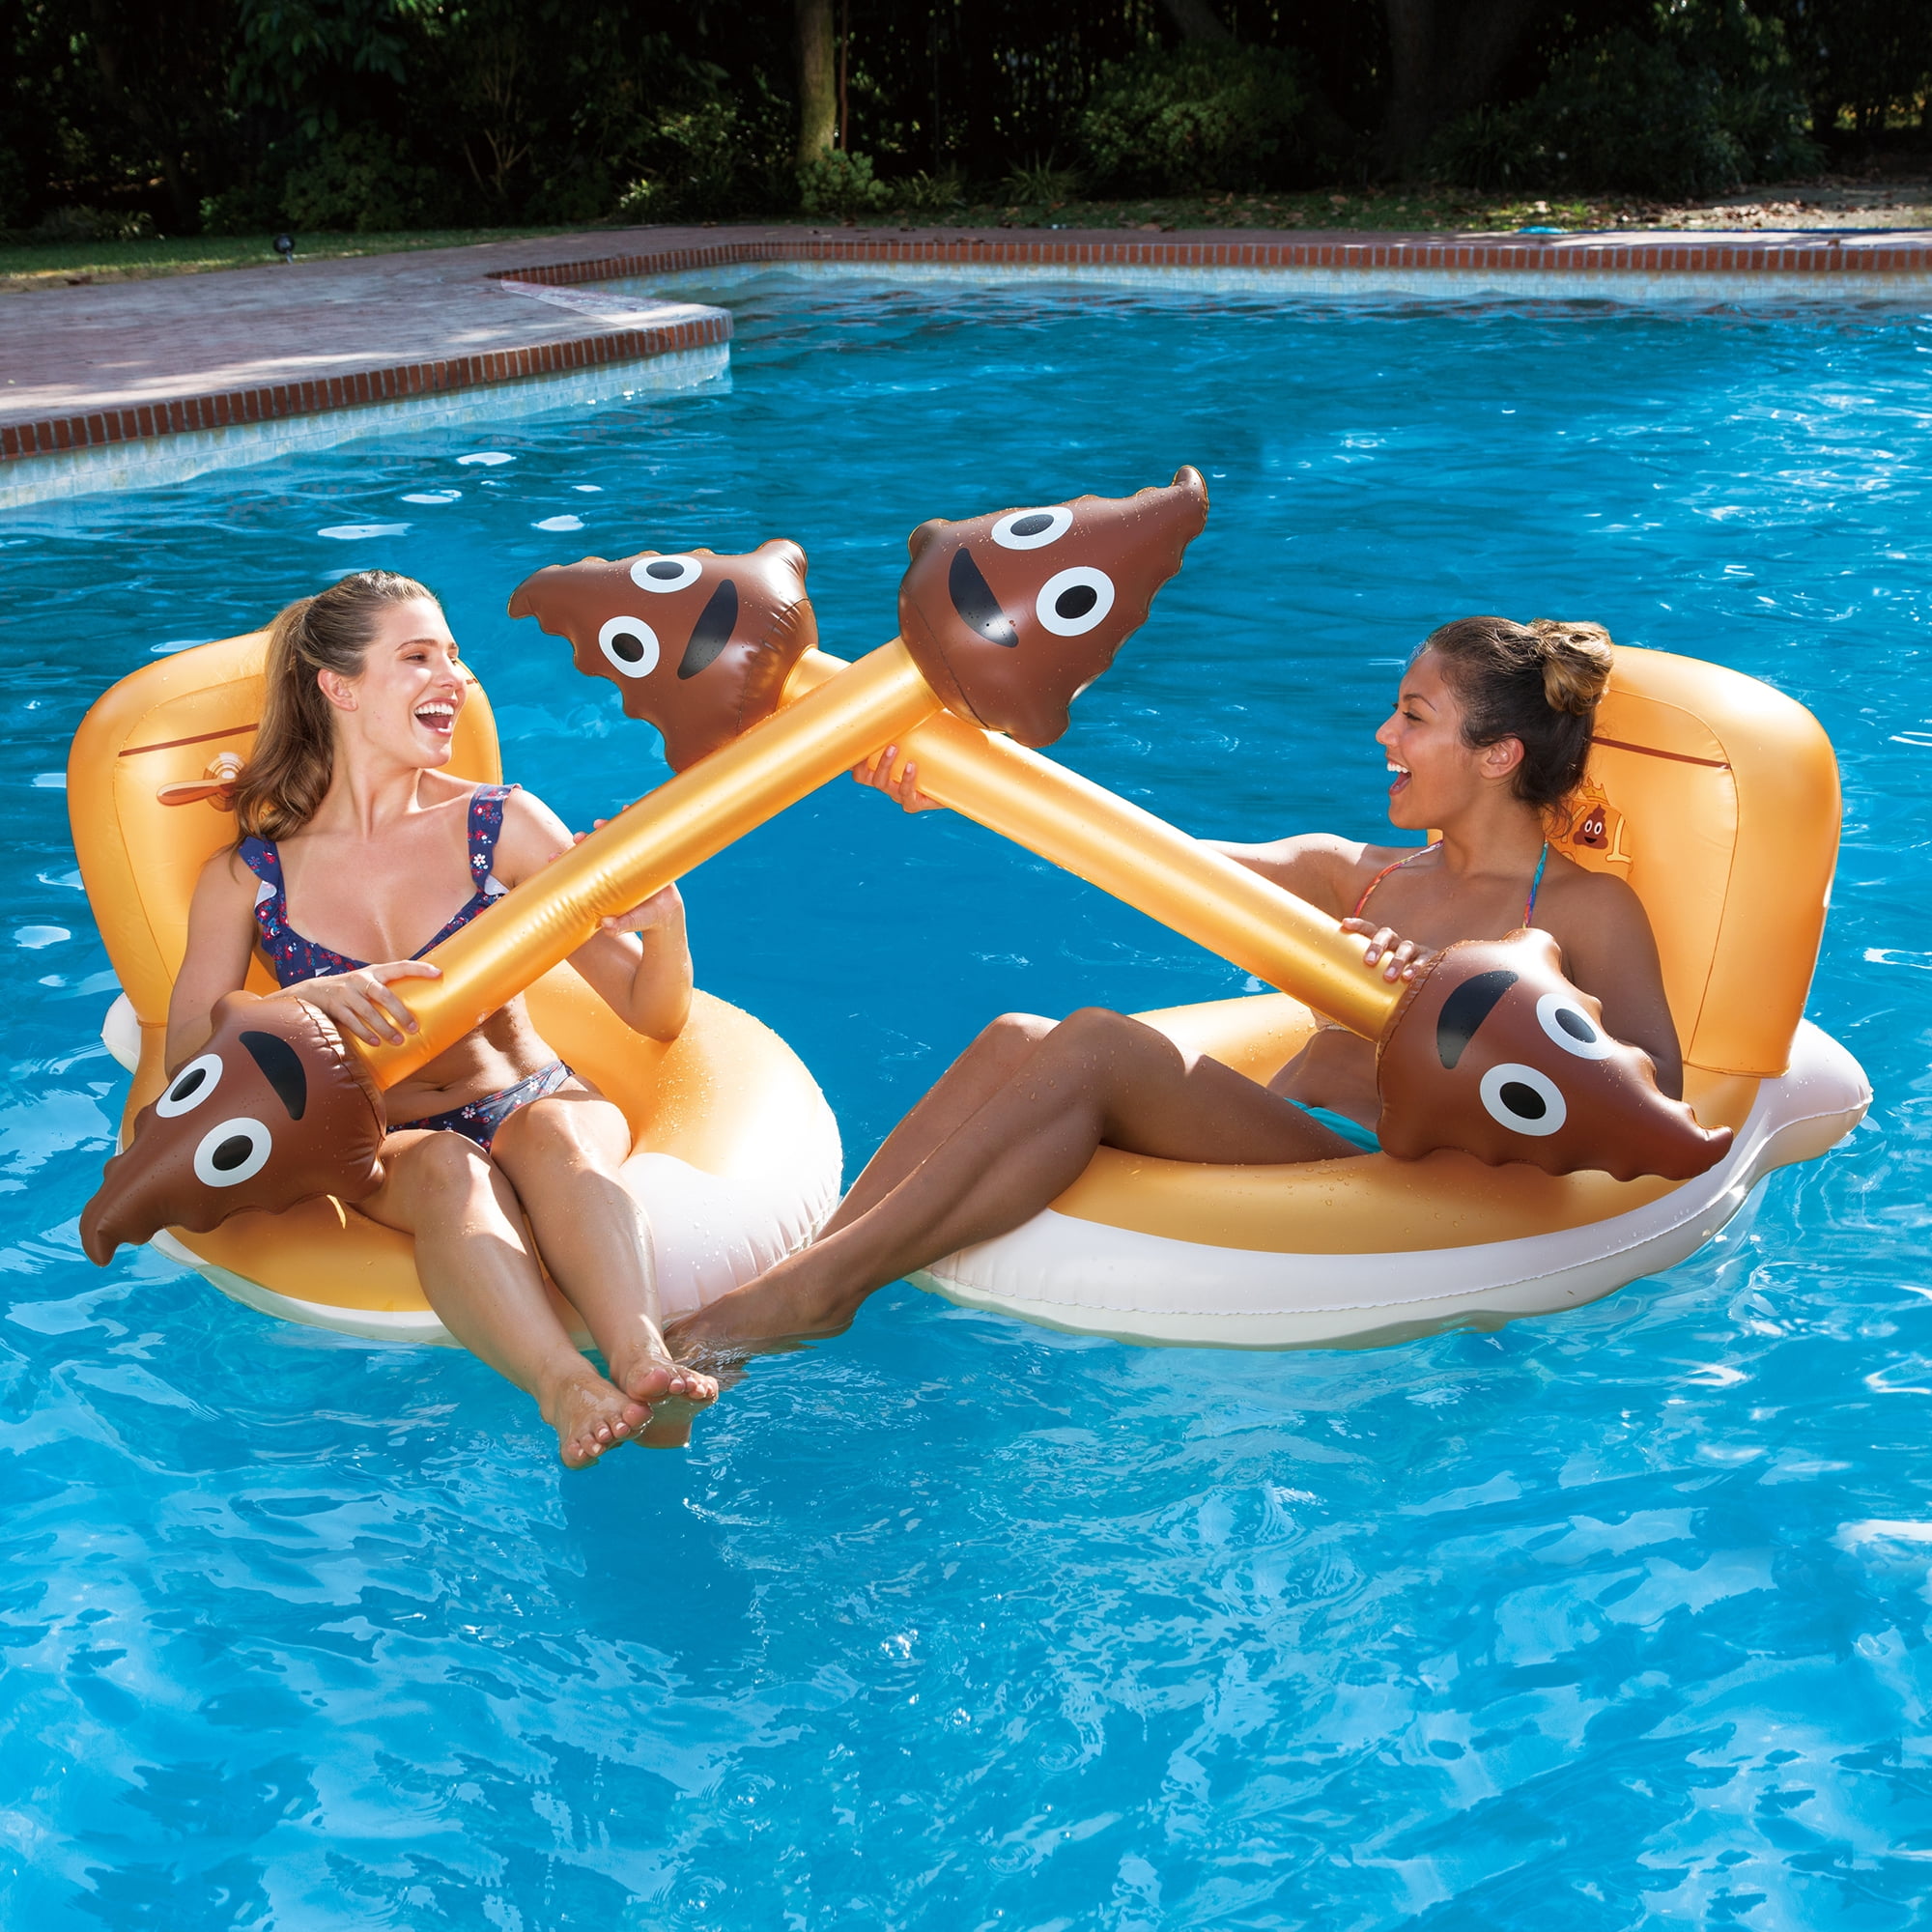 Inflatable Pool Games For Adults Hot Sale, 56% OFF | www.colegiogamarra.com